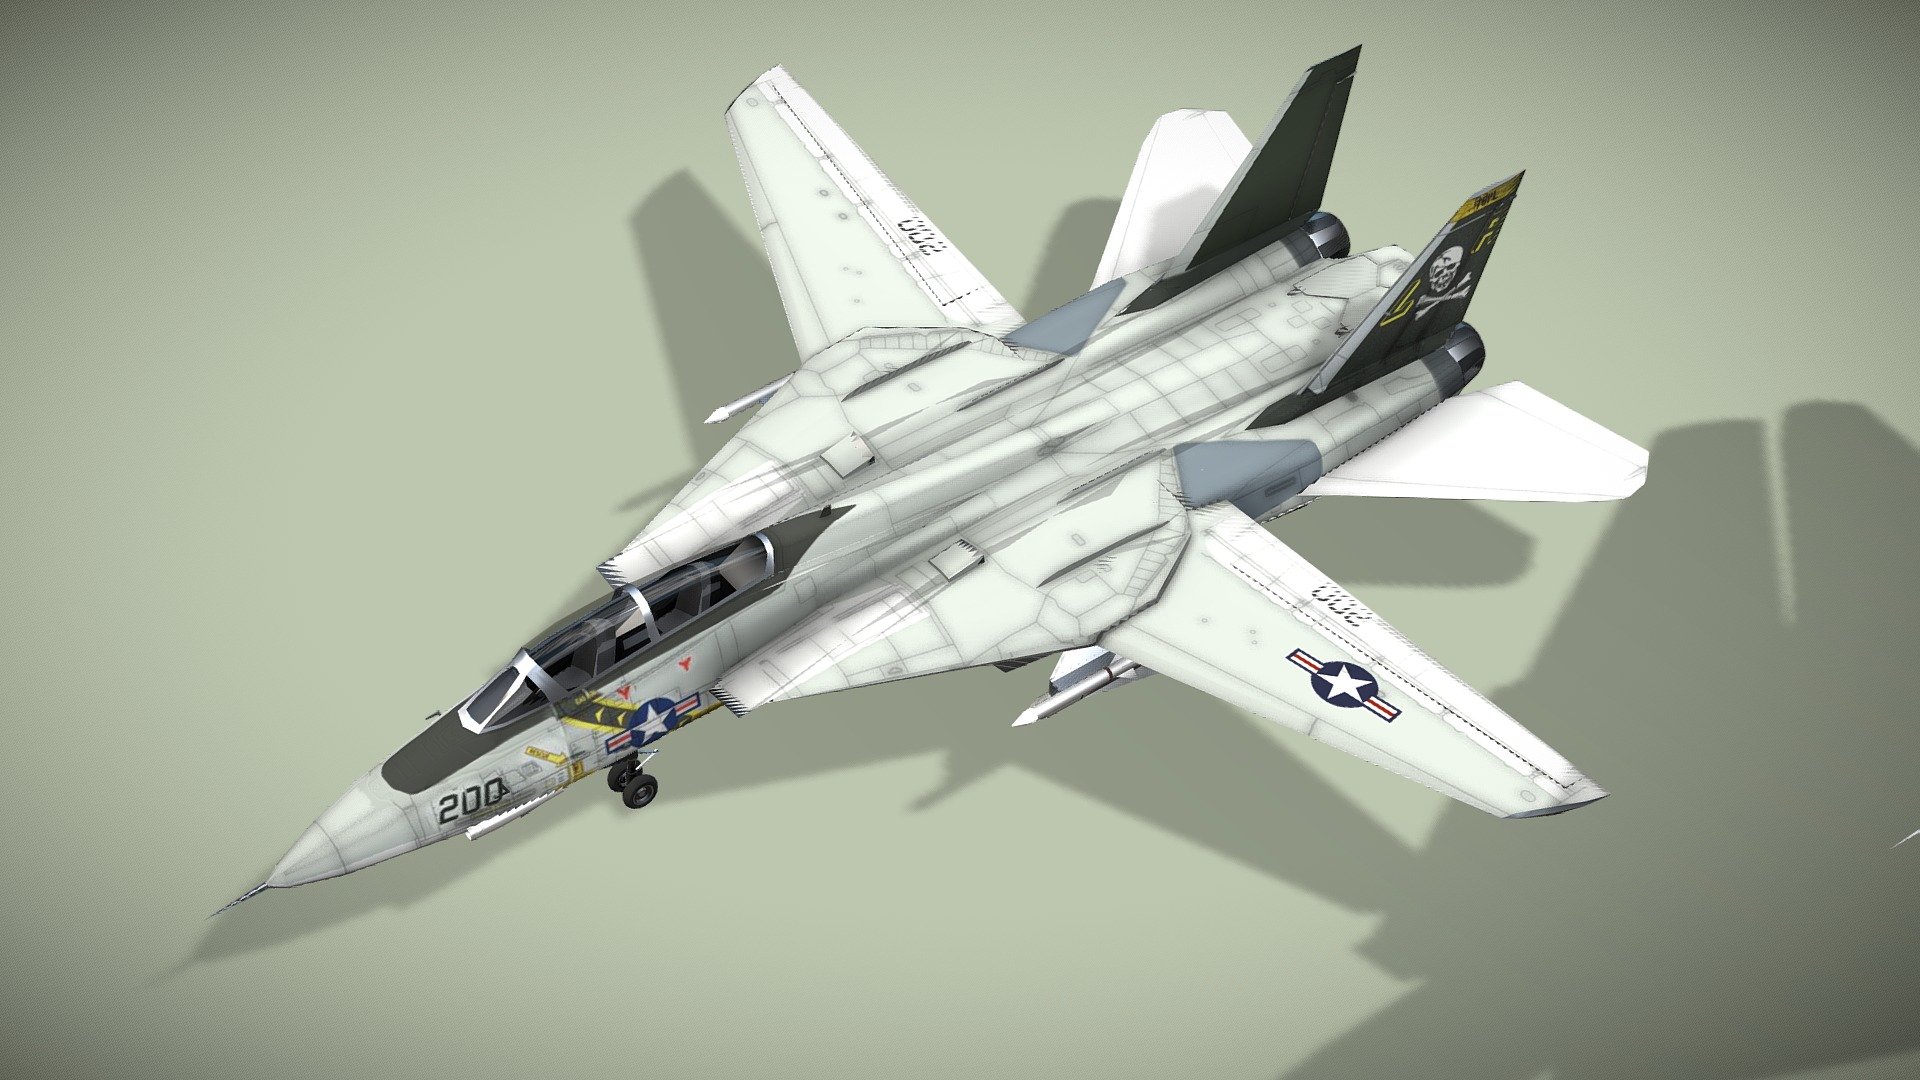 Grumman F-14 Tomcat

Lowpoly model of american jet fighter



Grumman F-14 Tomcat is an American carrier-capable supersonic, twin-engine, two-seat, twin-tail, variable-sweep wing fighter aircraft. The Tomcat was developed for the United States Navy's Naval Fighter Experimental program. The F-14 was the first of the American Teen Series fighters, which were designed incorporating air combat experience against MiG fighters during the Vietnam War.

The F-14 first flew on 21 December 1970 and made its first deployment in 1974 with the U.S. Navy, replacing the F-4 Phantom II. The F-14 served as the U.S. Navy's primary maritime air superiority fighter, fleet defense interceptor, and tactical aerial reconnaissance platform into the 2000s. 



Fully rigged

Model has bump map, roughness map and 2 x diffuse textures

incl. STL 3D print file



Check also my other aircrafts and cars.

Patreon with monthly free model - Grumman F-14 Tomcat - Buy Royalty Free 3D model by NETRUNNER_pl 3d model